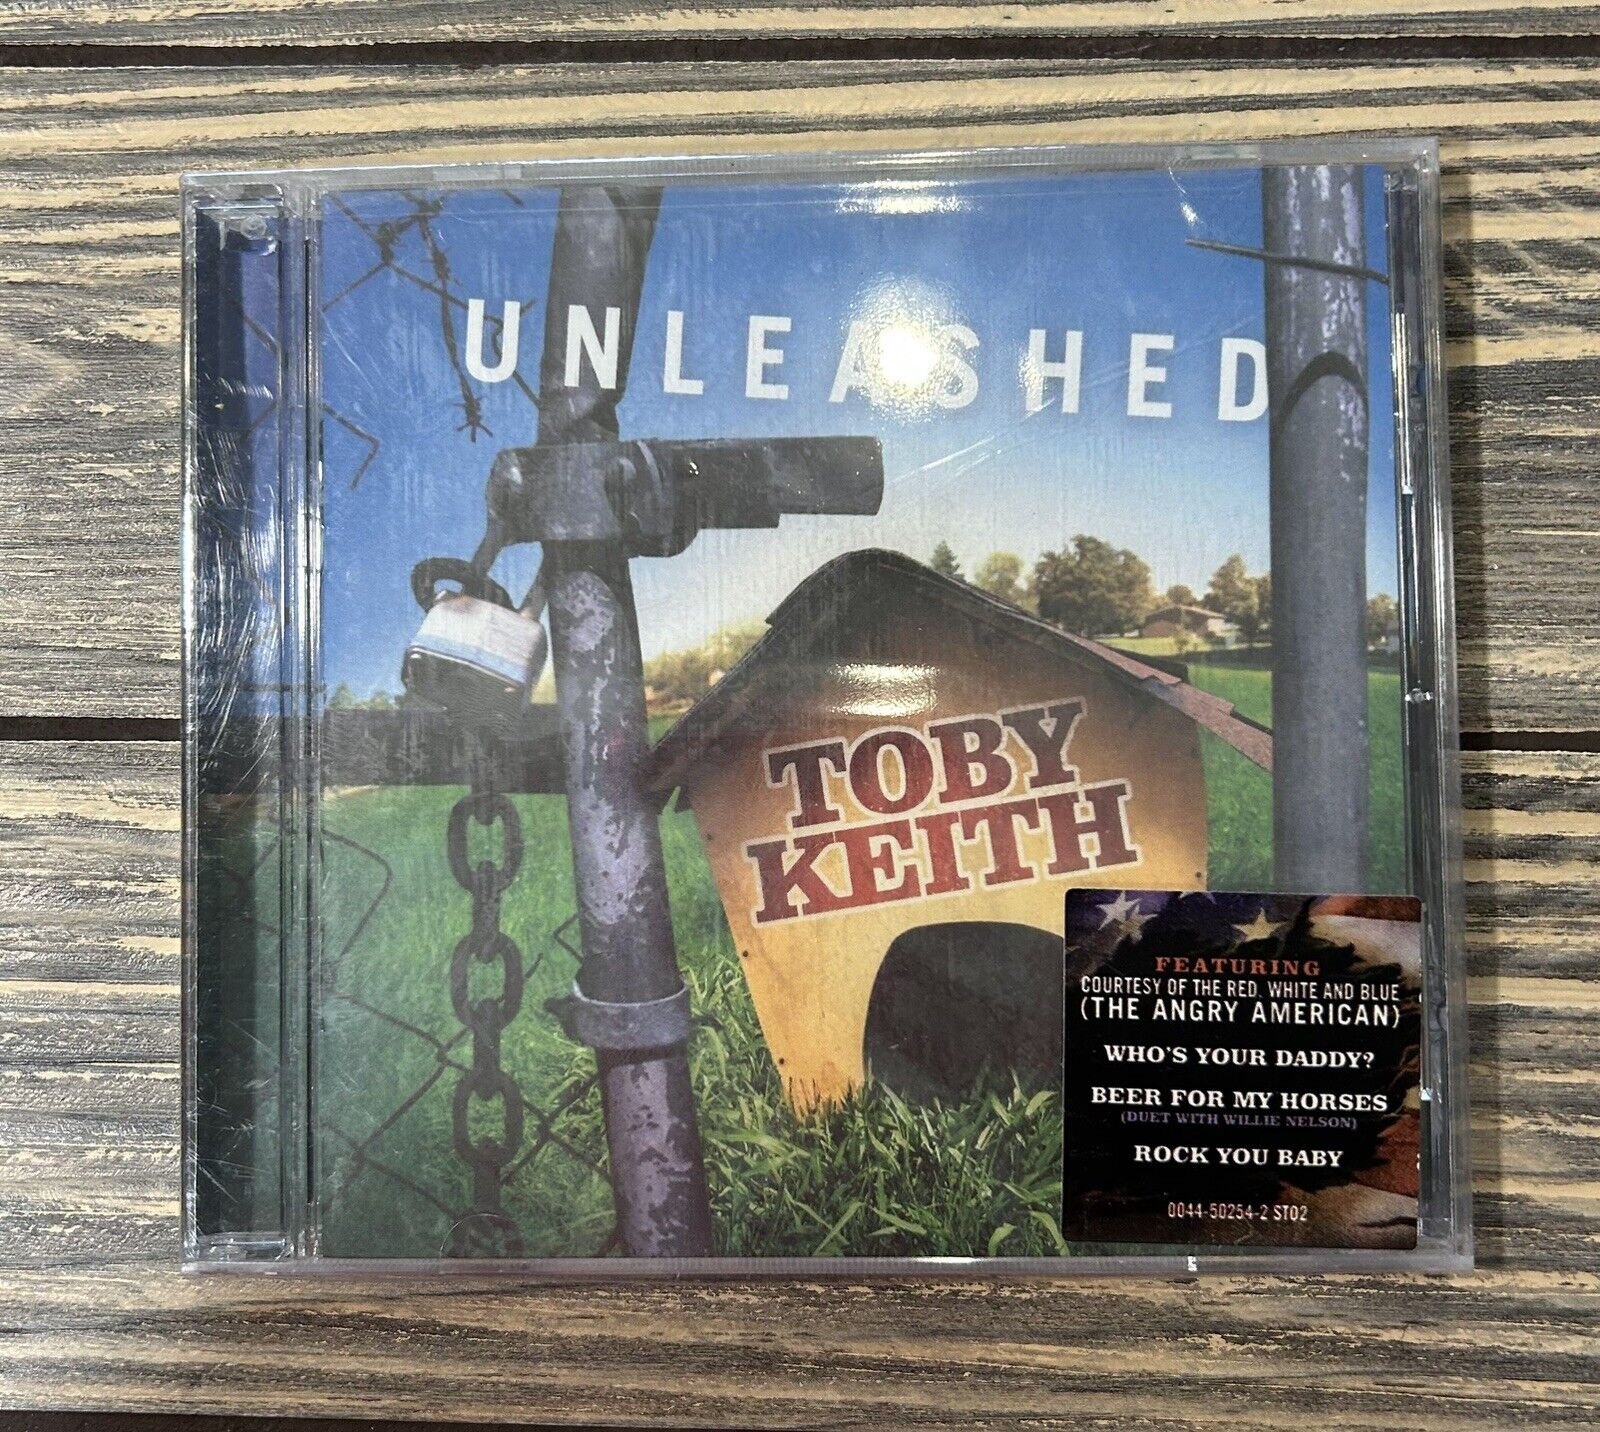 Toby Keith Unleashed CD 2002 - NEW SEALED 600445025424 | eBay